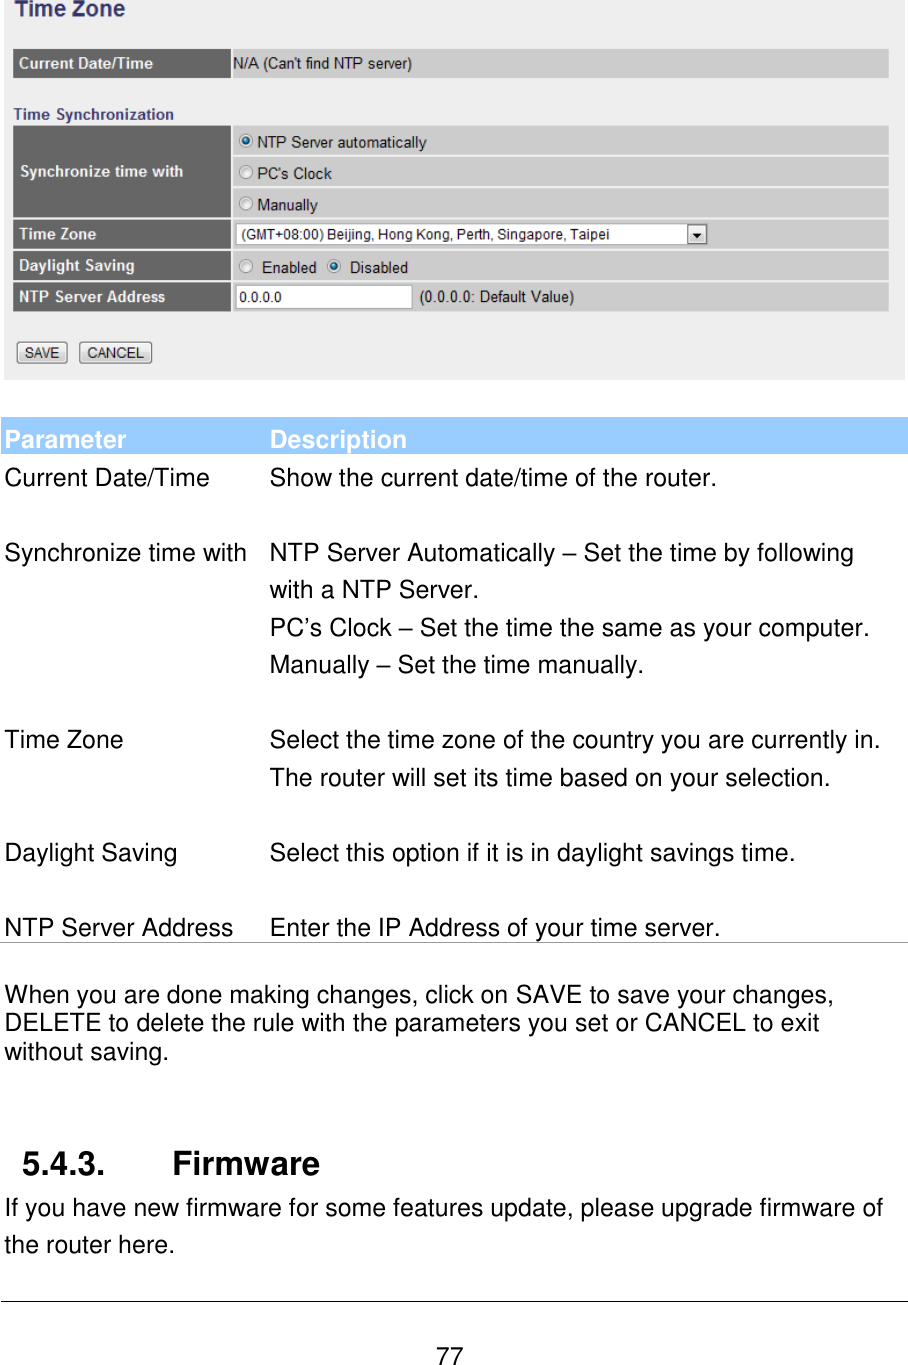   77    Parameter Description Current Date/Time Show the current date/time of the router.   Synchronize time with NTP Server Automatically – Set the time by following with a NTP Server. PC’s Clock – Set the time the same as your computer. Manually – Set the time manually.   Time Zone Select the time zone of the country you are currently in. The router will set its time based on your selection.   Daylight Saving Select this option if it is in daylight savings time.   NTP Server Address Enter the IP Address of your time server.   When you are done making changes, click on SAVE to save your changes, DELETE to delete the rule with the parameters you set or CANCEL to exit without saving.   5.4.3.  Firmware If you have new firmware for some features update, please upgrade firmware of the router here.  